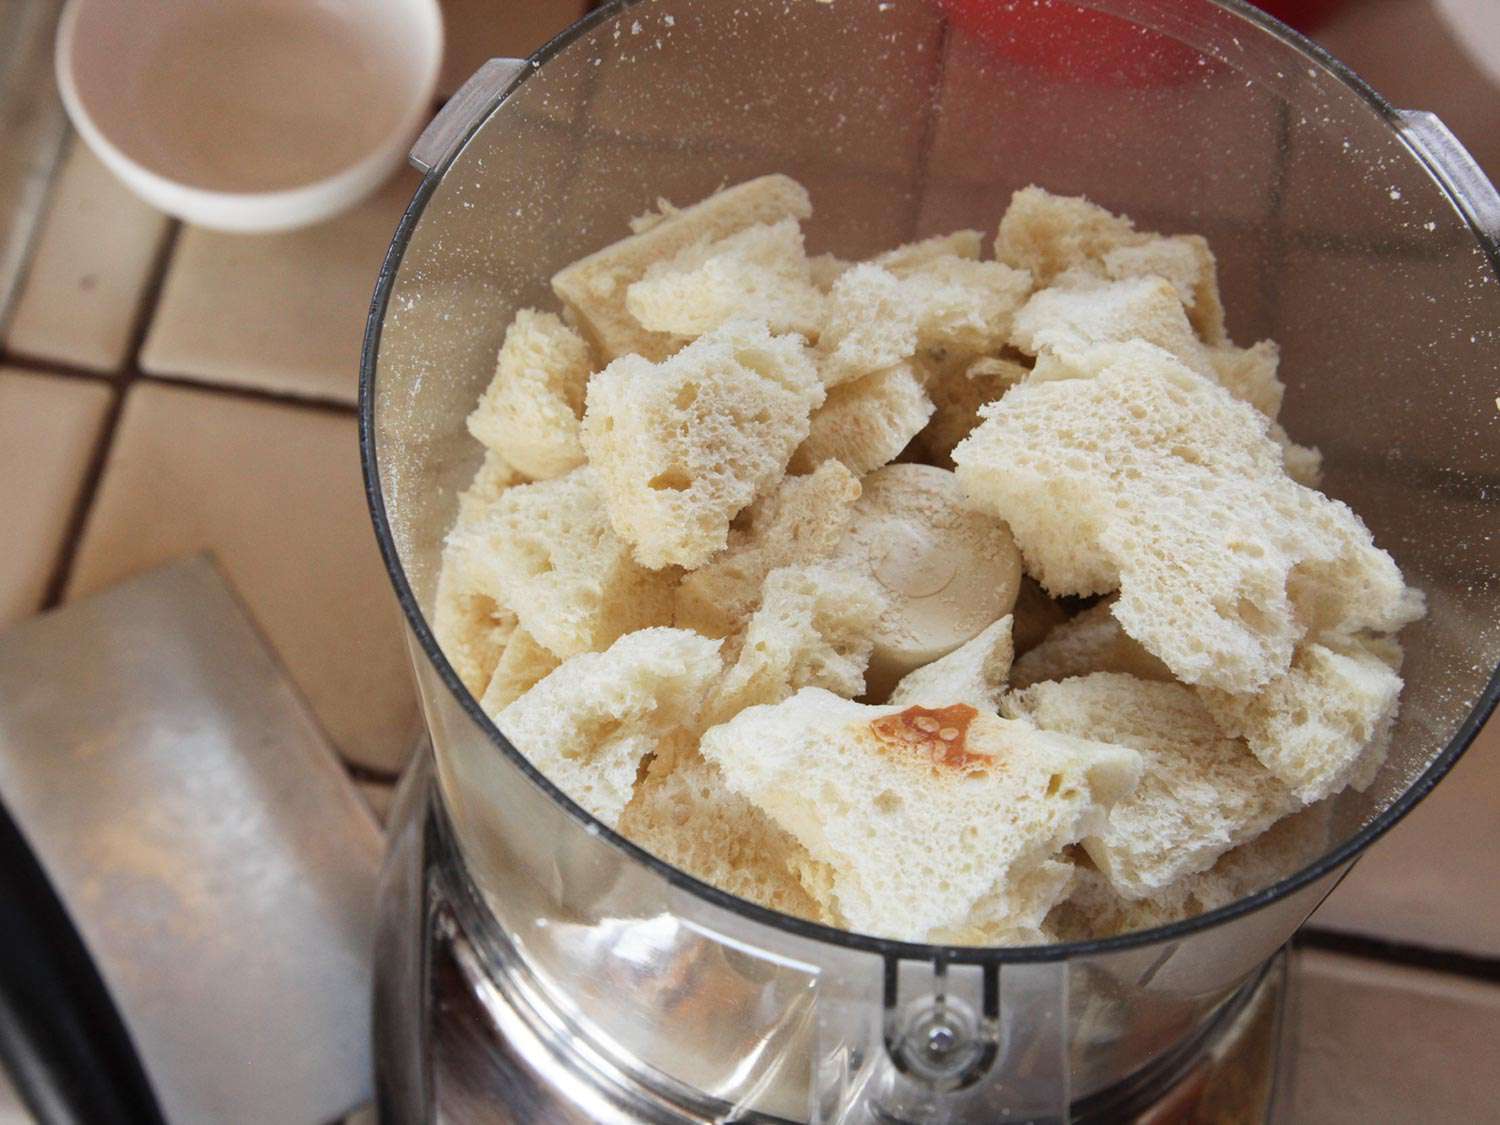 Crustless dehydrated craggy bits of bread in food processor bowl